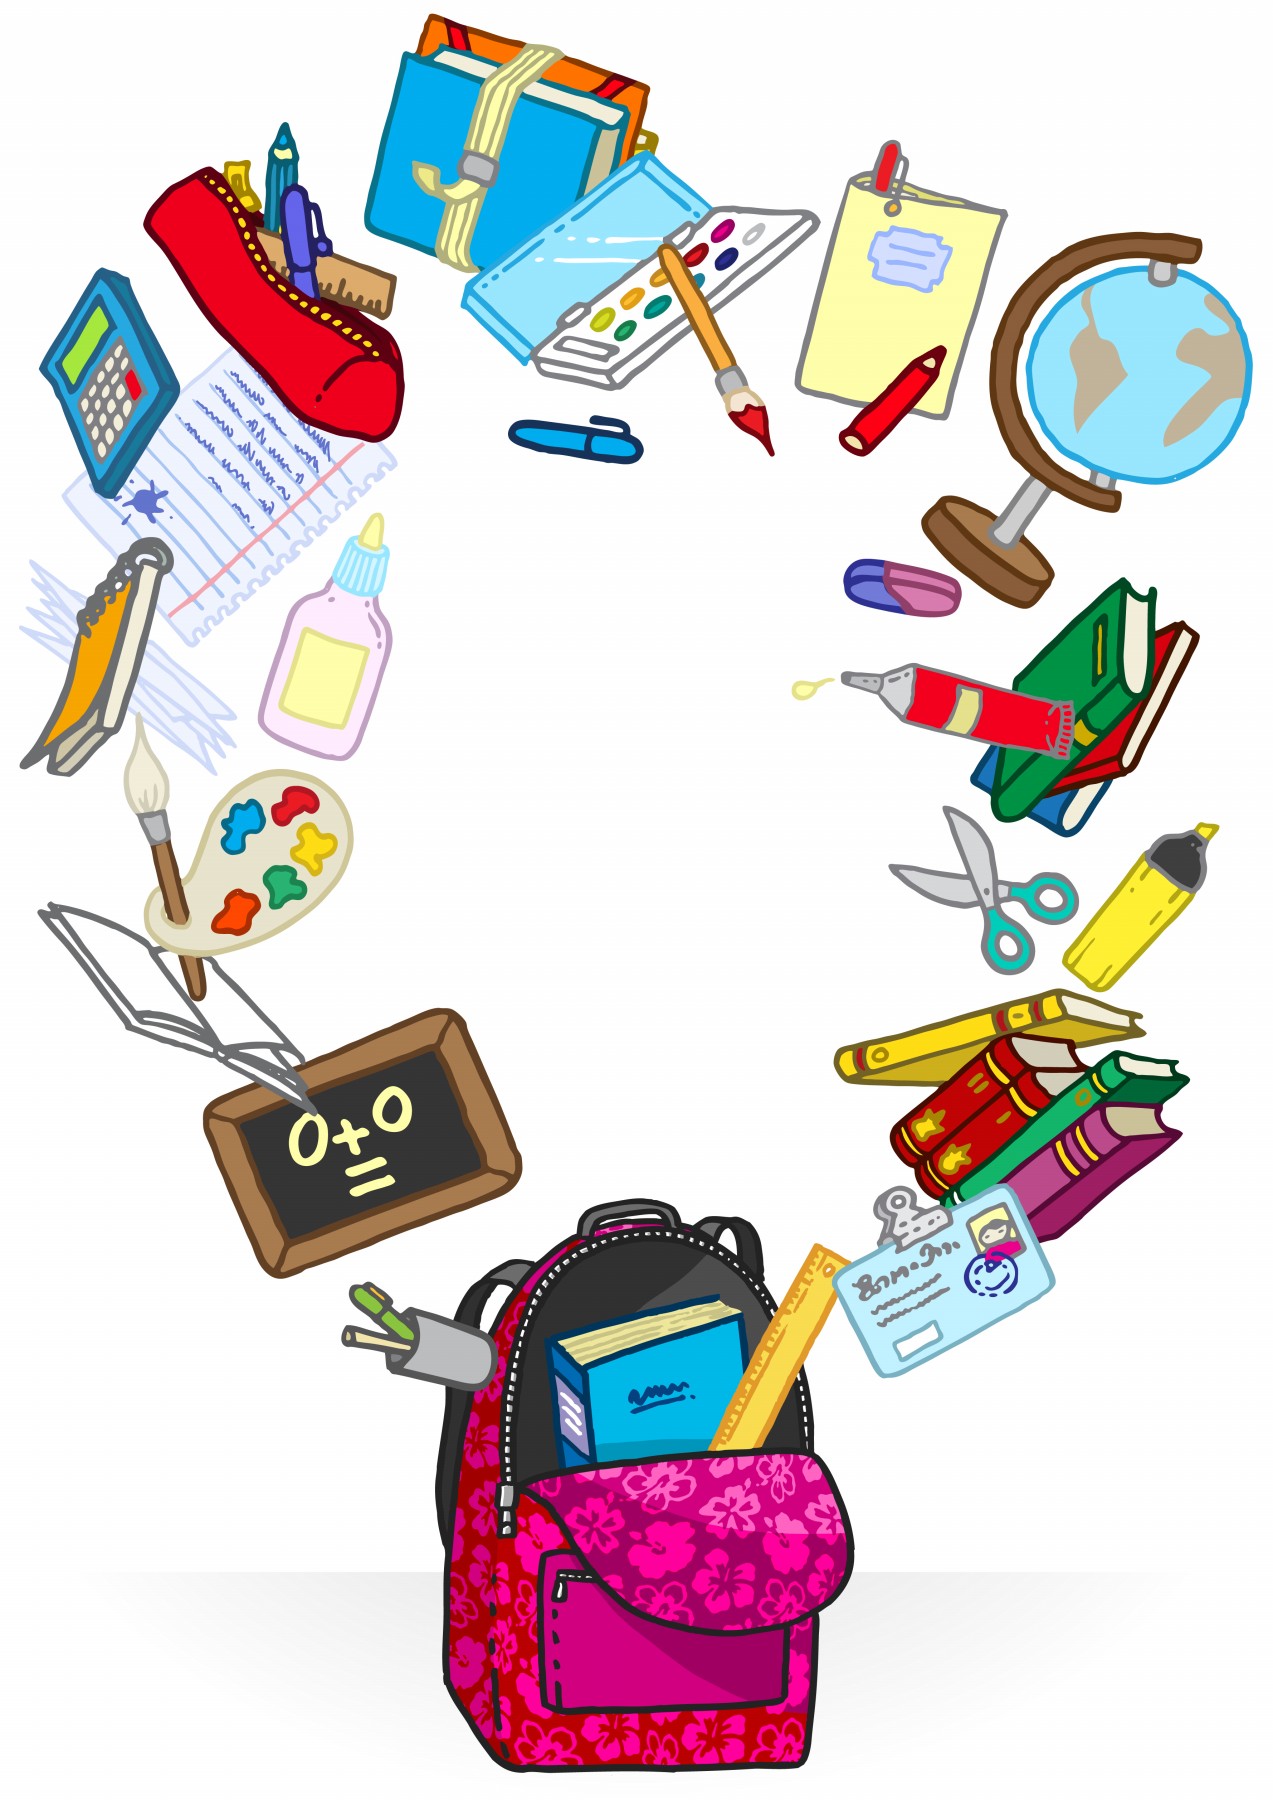 Free Cartoon School Images, Download Free Cartoon School Images png images,  Free ClipArts on Clipart Library